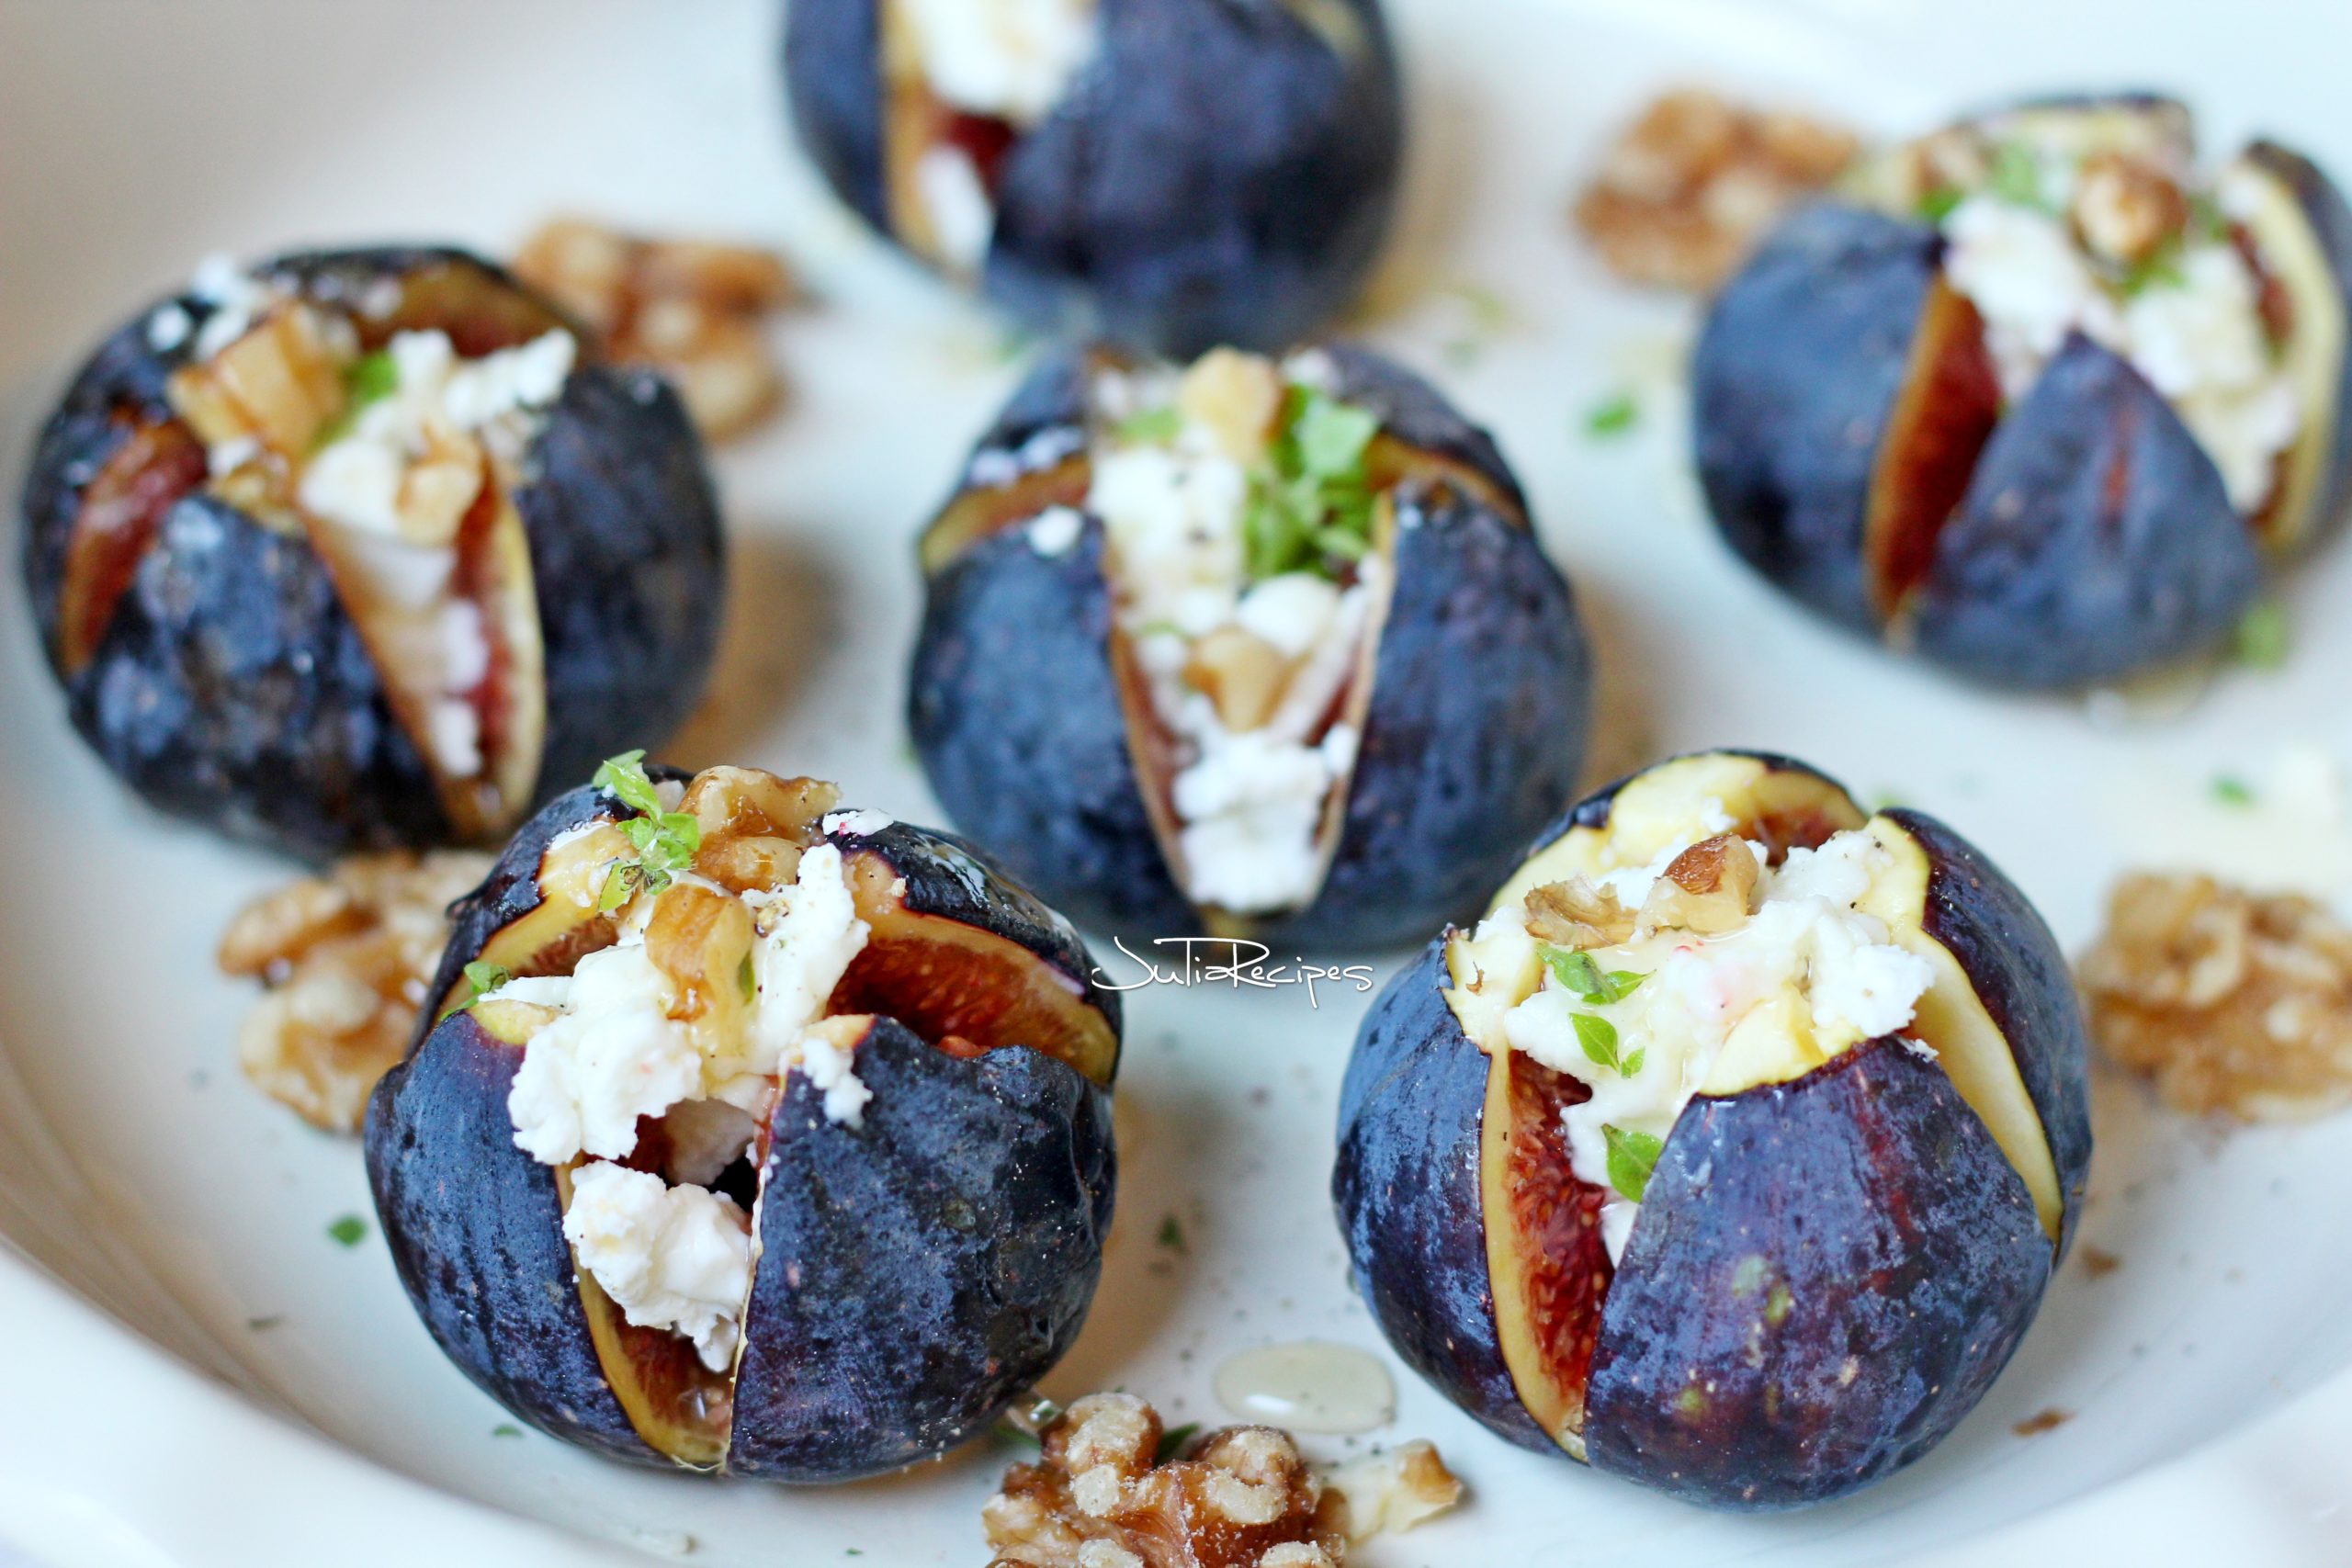 baked figs filled with goat cheese and walnuts